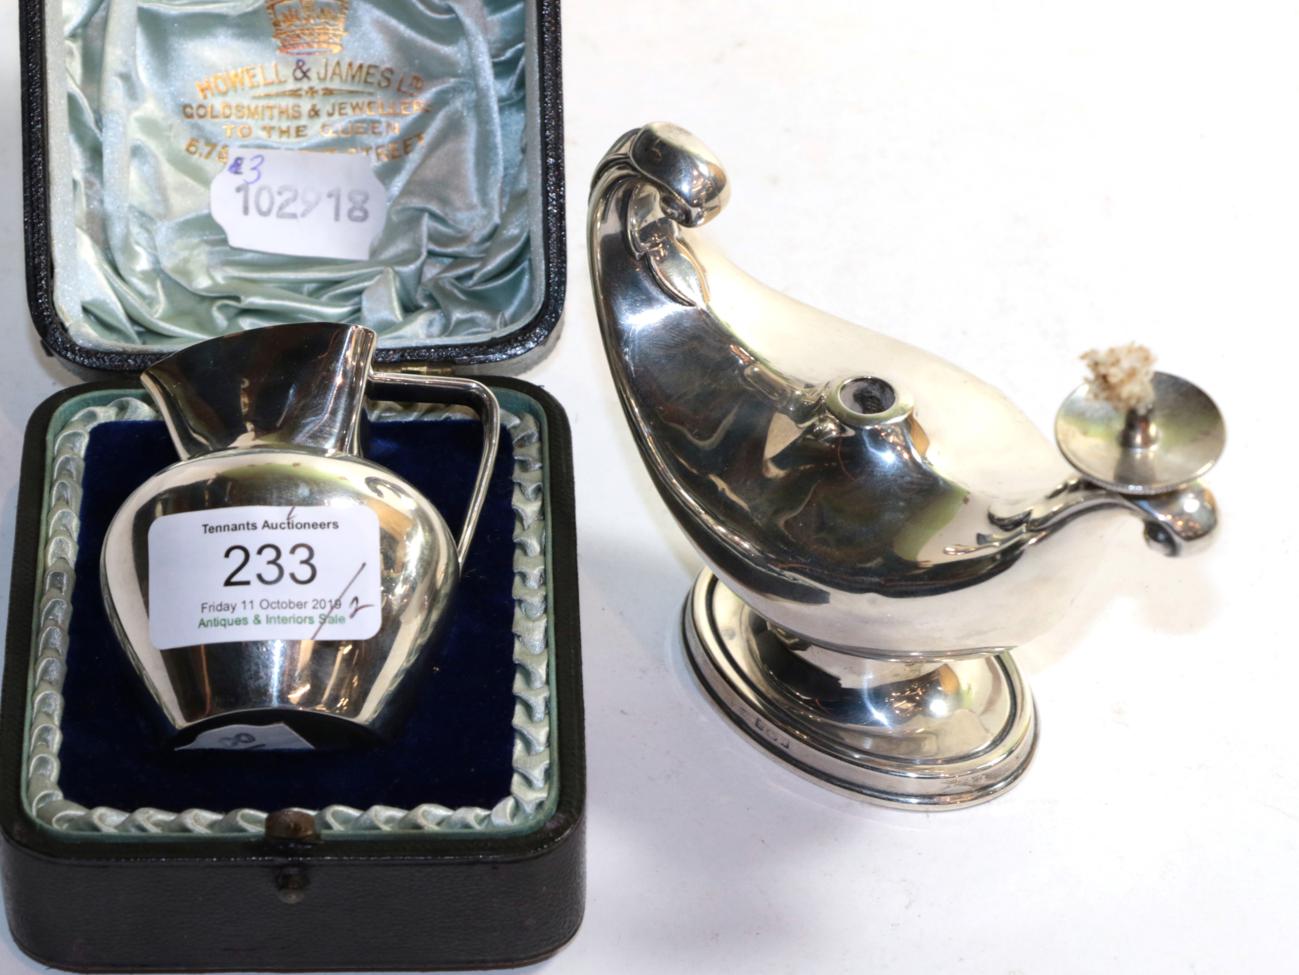 Lot 233 - An Edwardian silver table cigar lighter in the form of a Roman lamp, Birmingham, 1910 (missing...